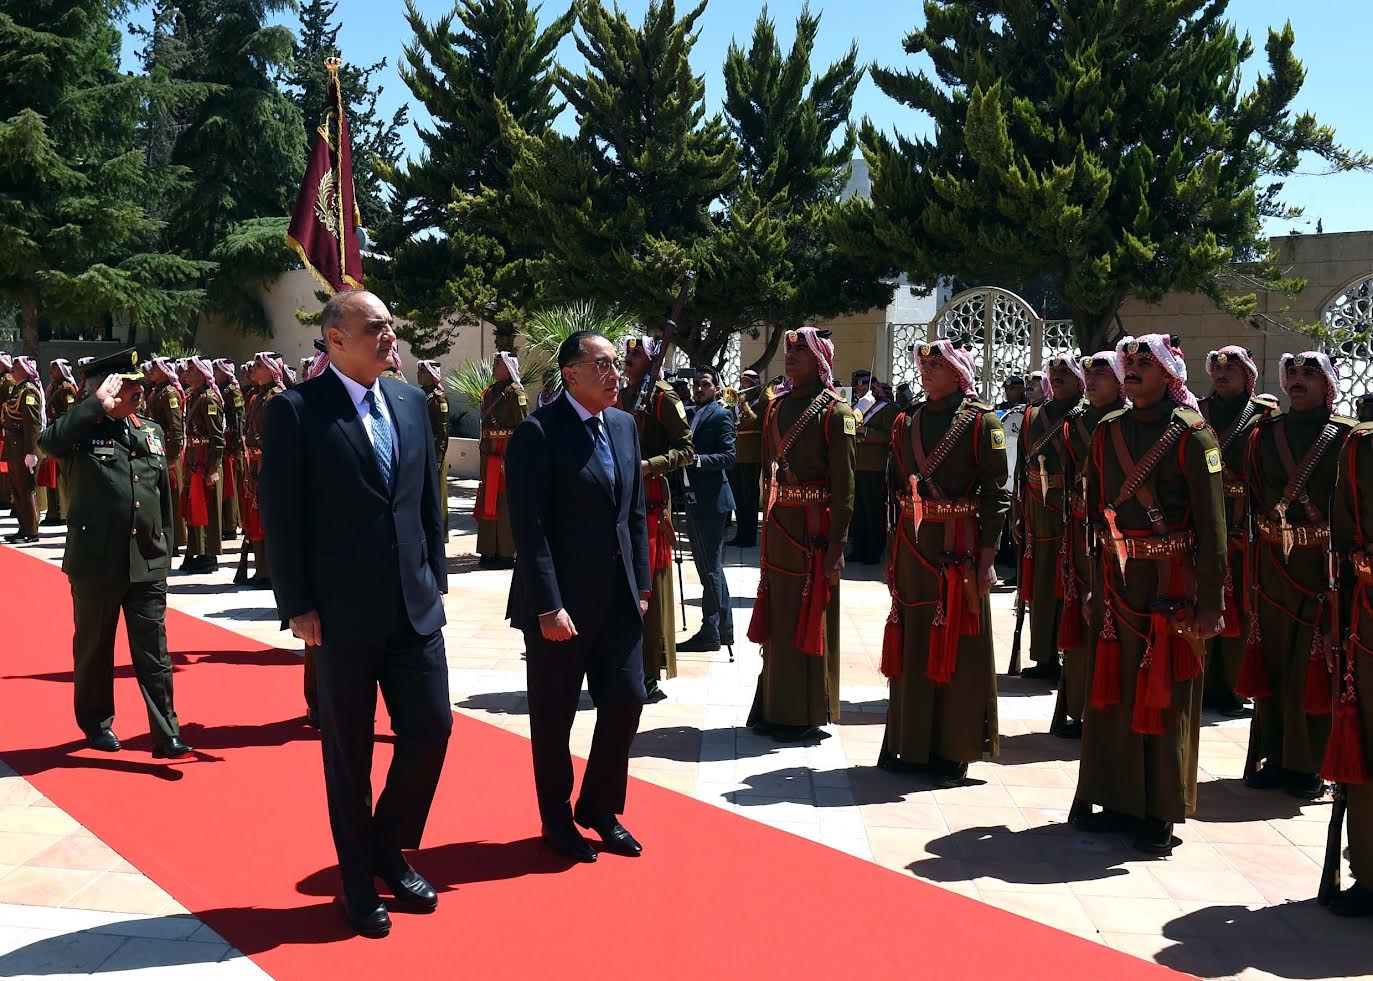 An official reception ceremony for the Prime Minister at the headquarters of the Jordanian government